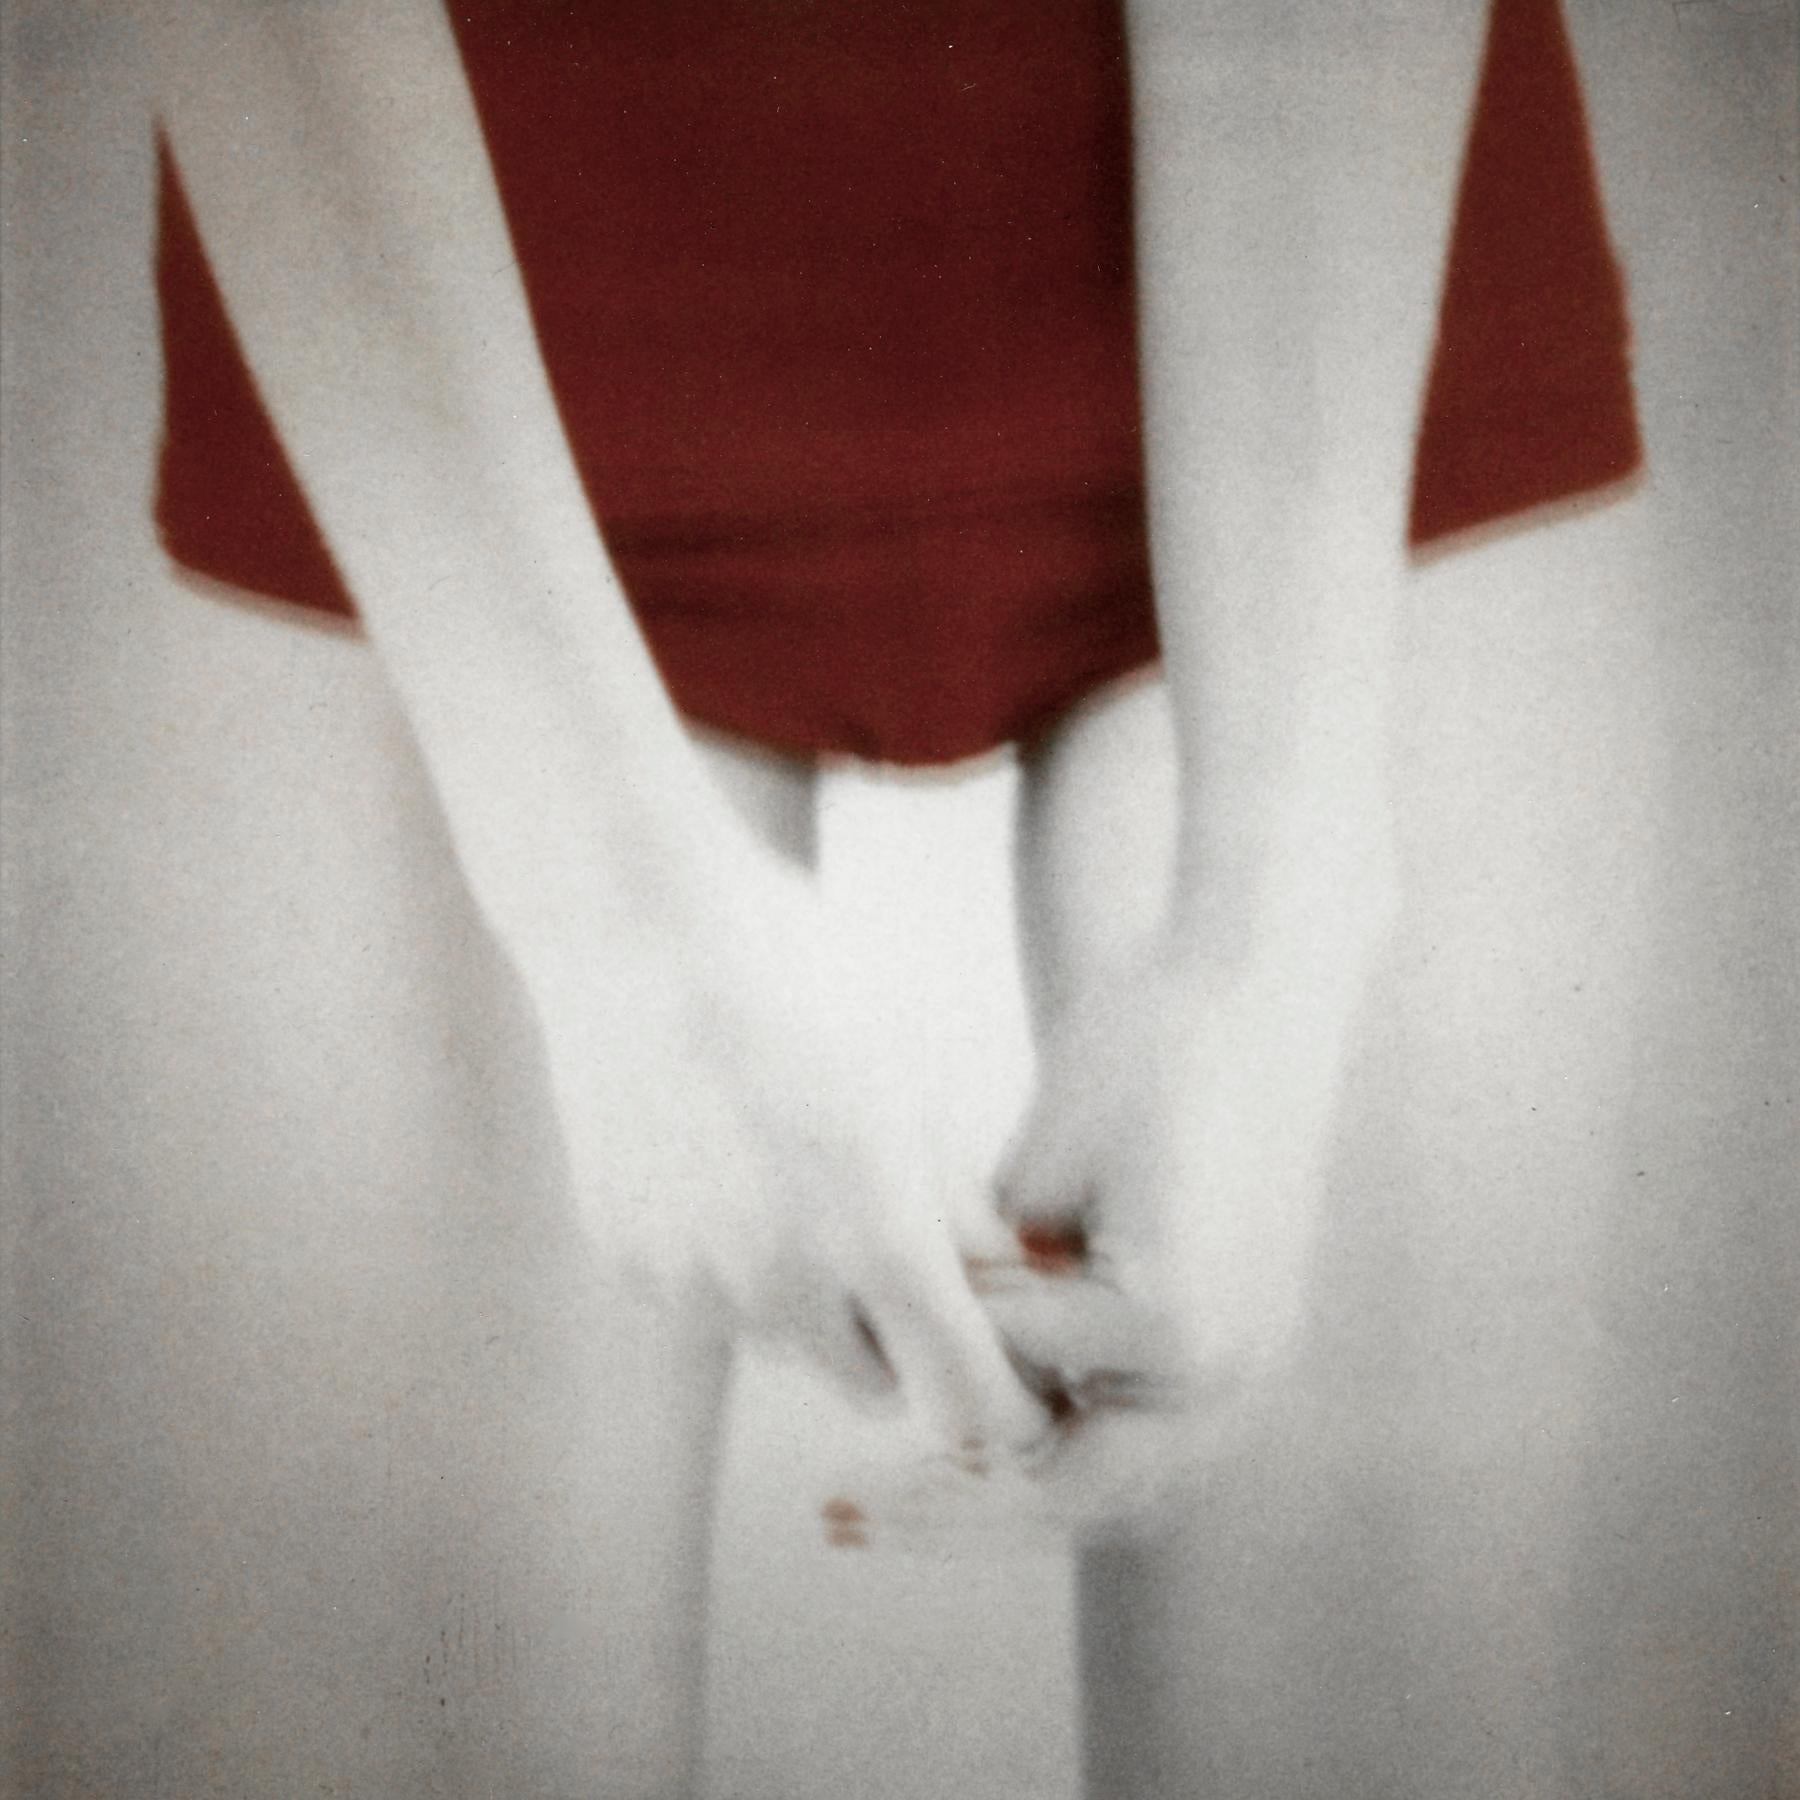 Hands on Red, by Mira Loew, from the “Bright Bodies” photography series